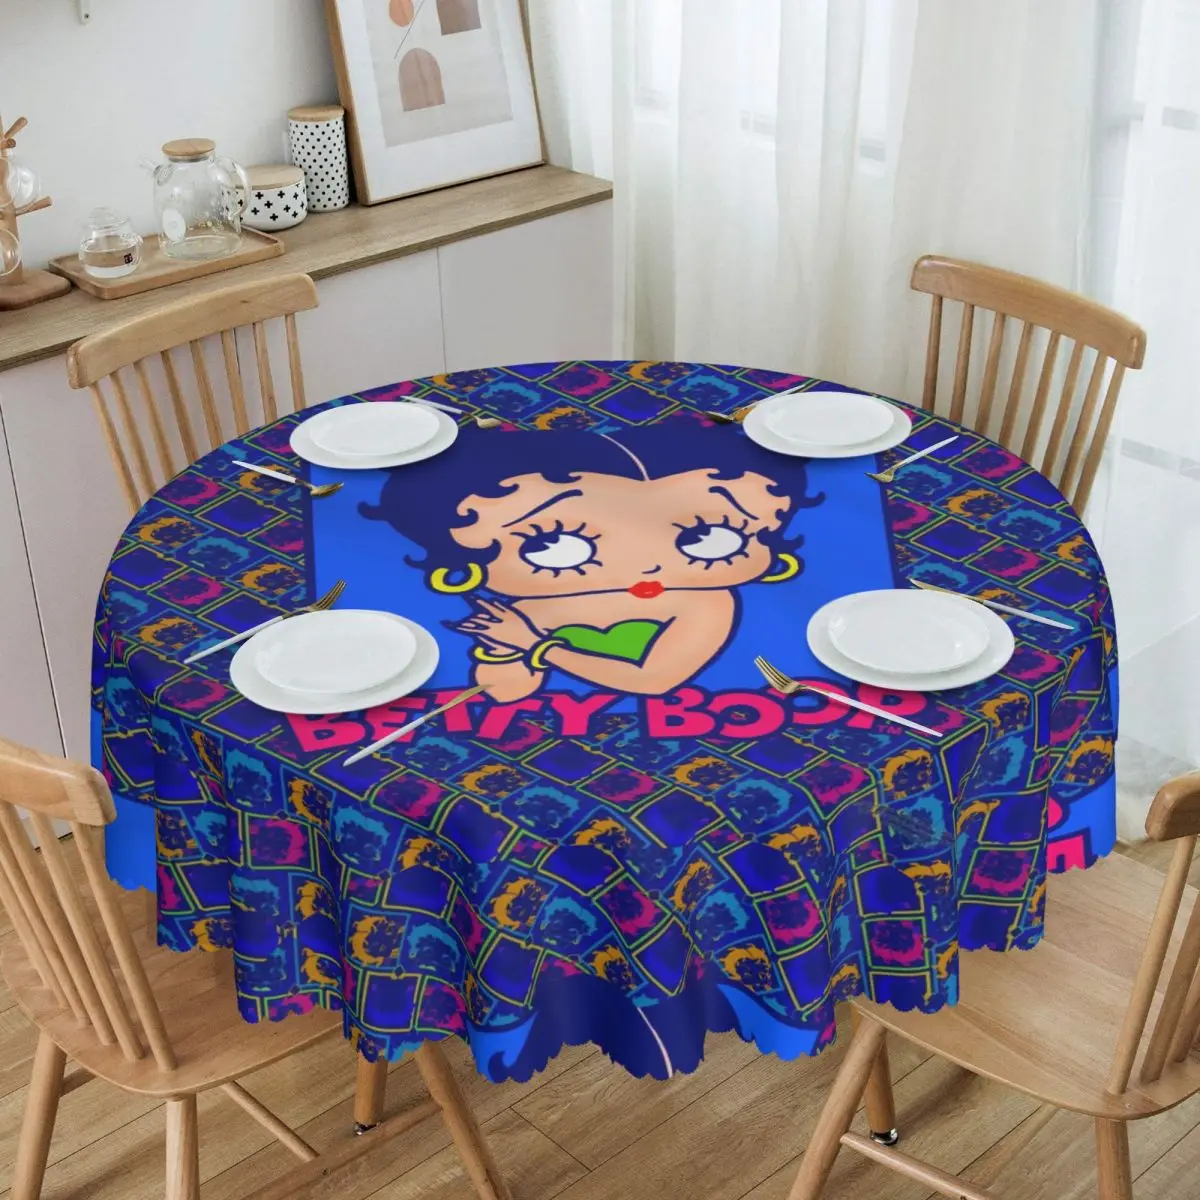 

Cartoon Girl Boop Bettys Round Tablecloths 60 Inches Table Cover for Parties Table Cloth